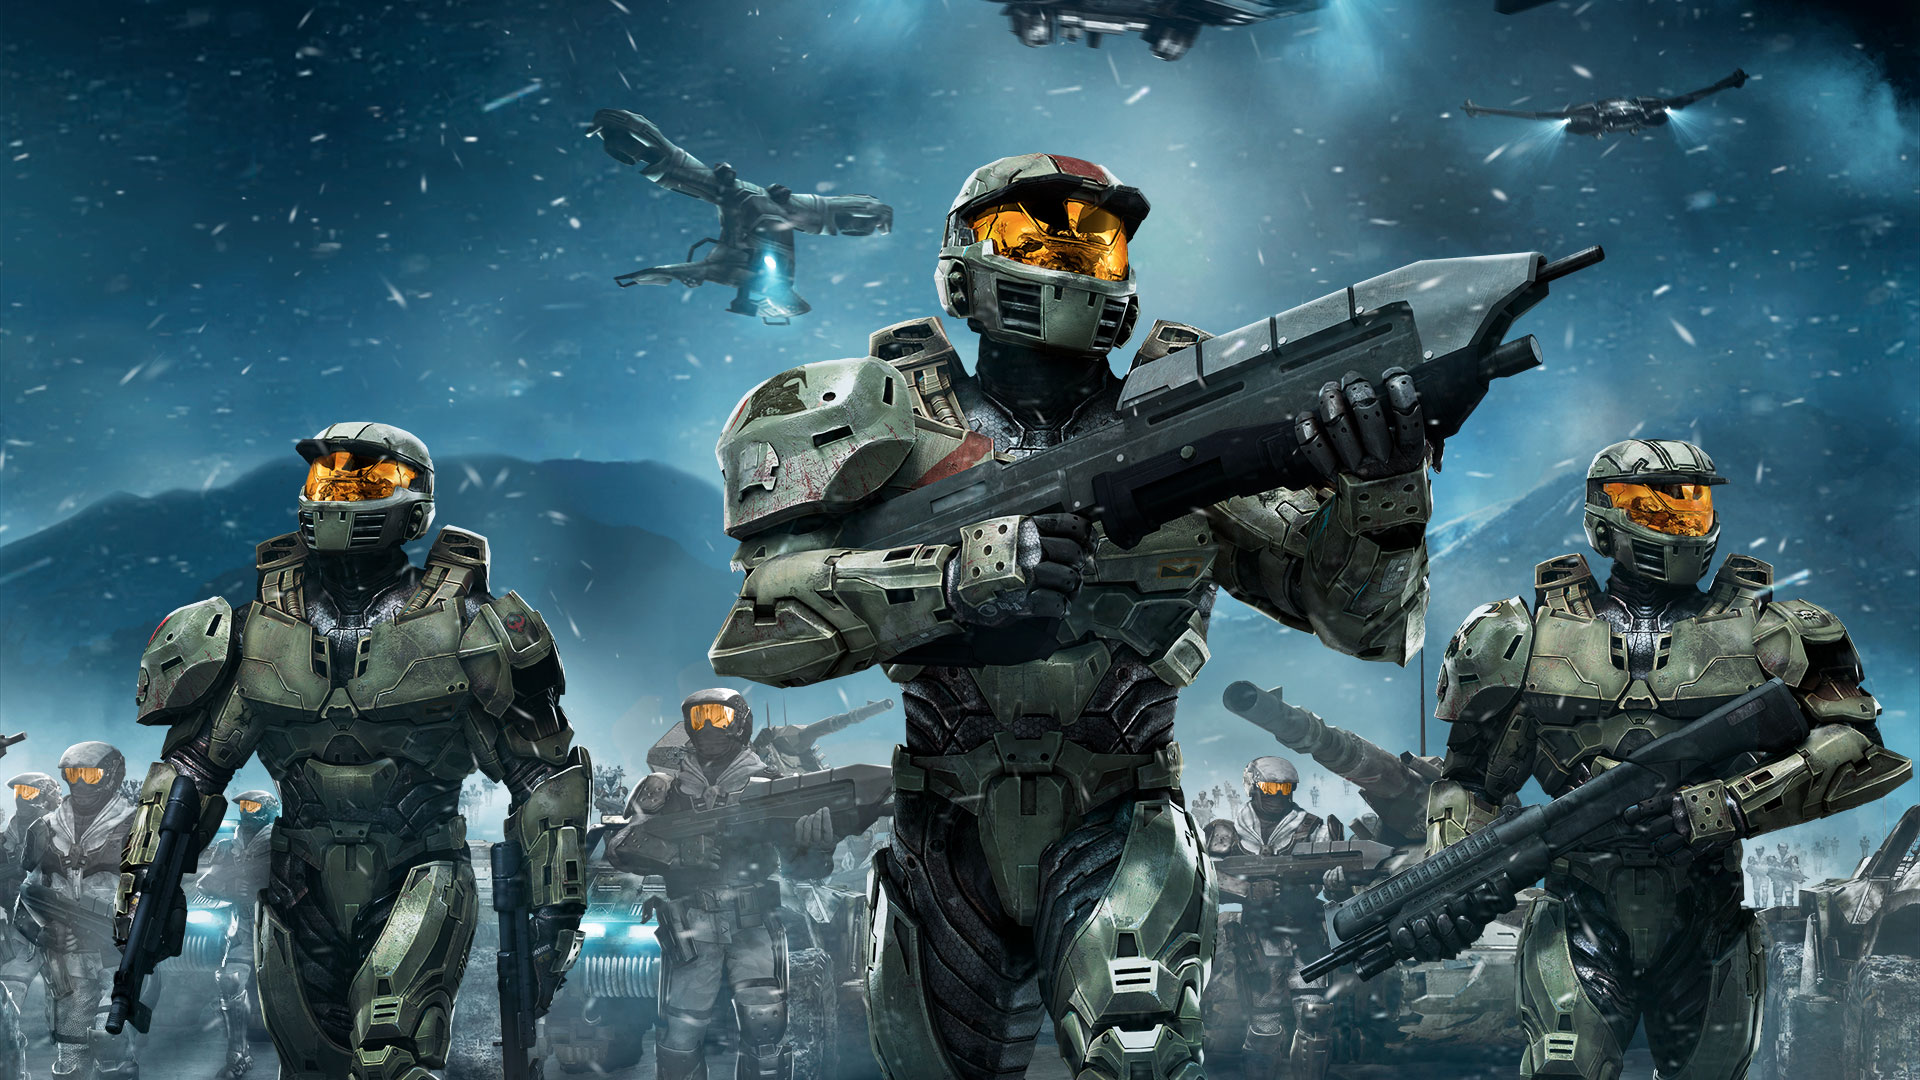 Halo Wars | Games | Halo - Official Site